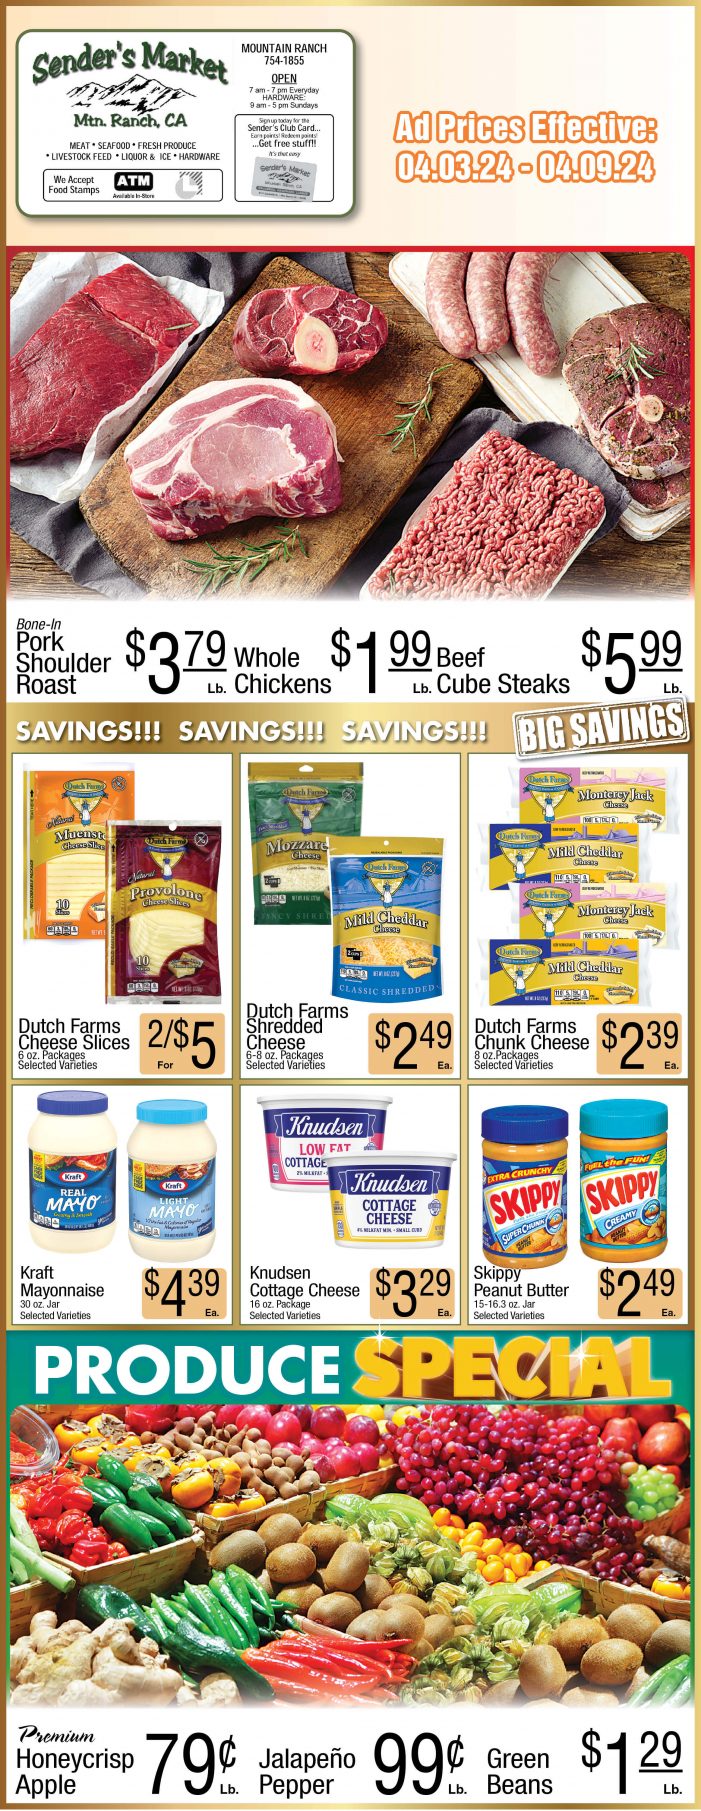 Sender’s Market Weekly Ad & Grocery Specials Through April 9th! Shop Local & Save!!